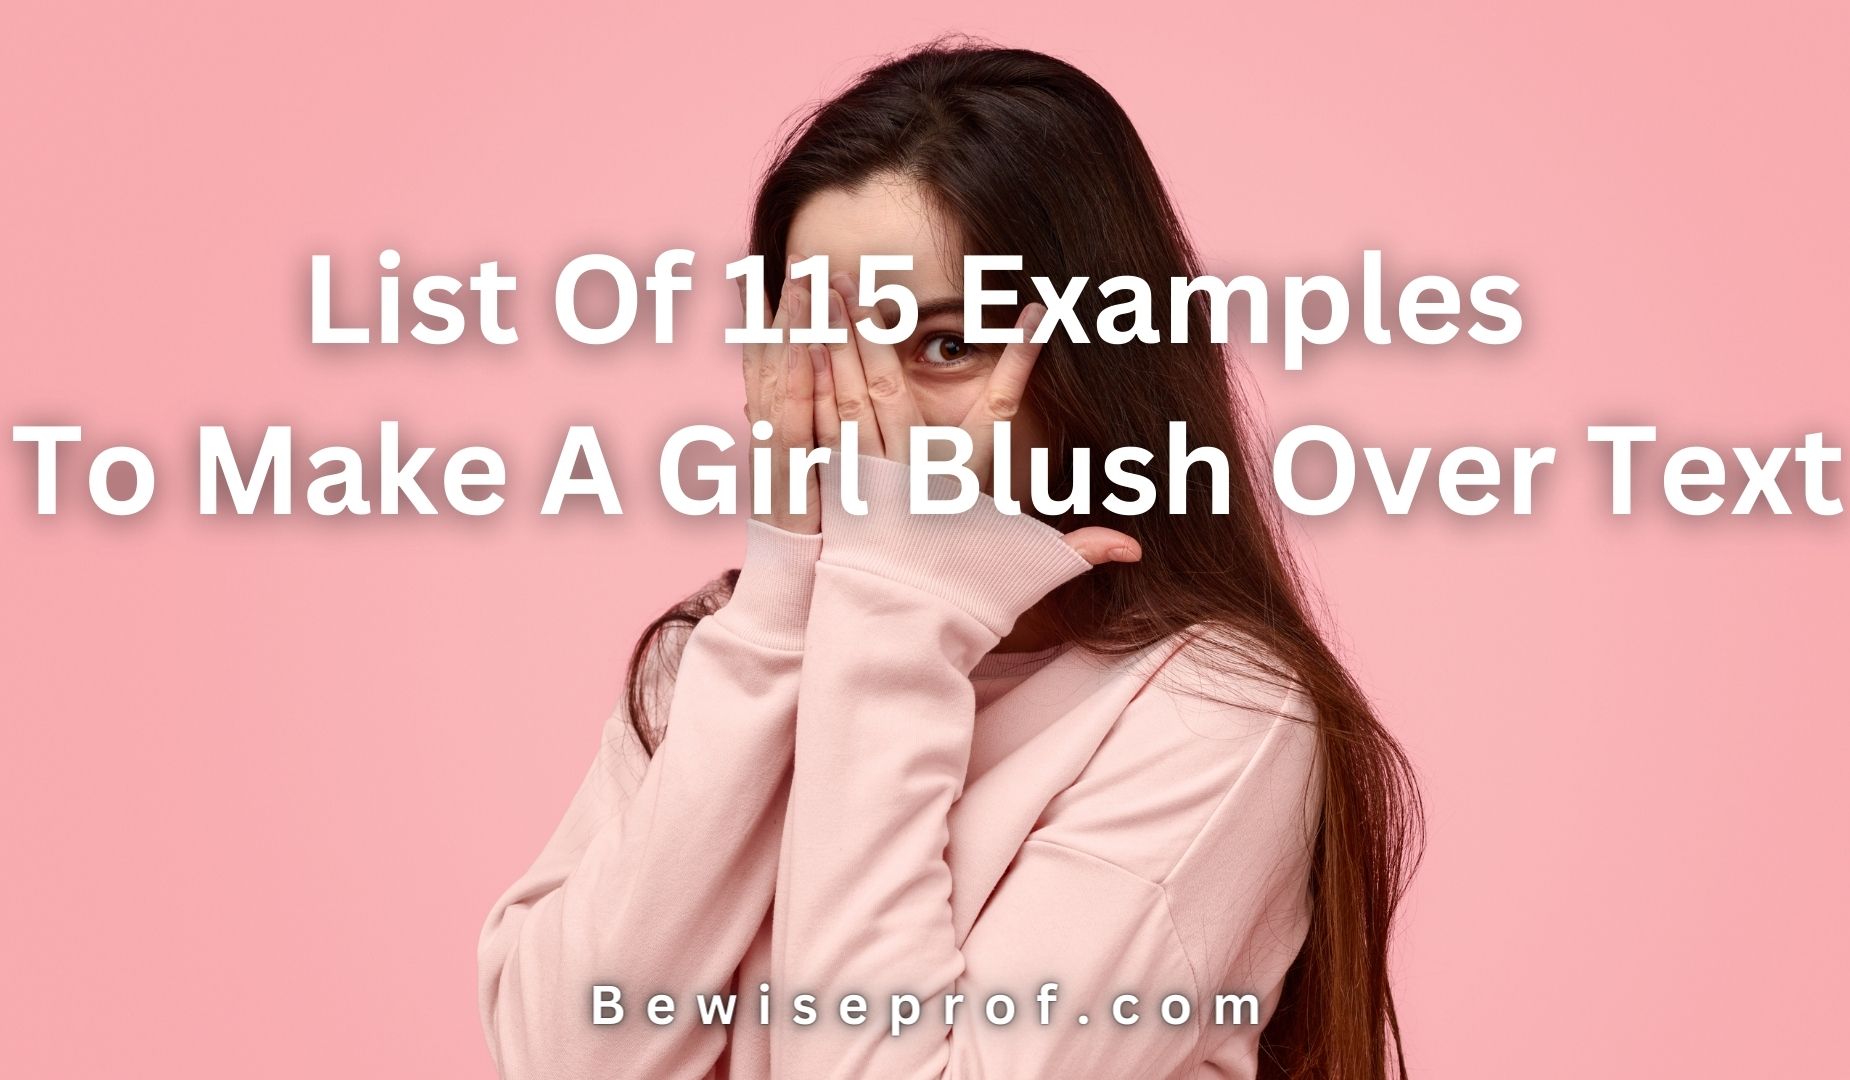 List Of 115 Examples To Make A Girl Blush Over Text